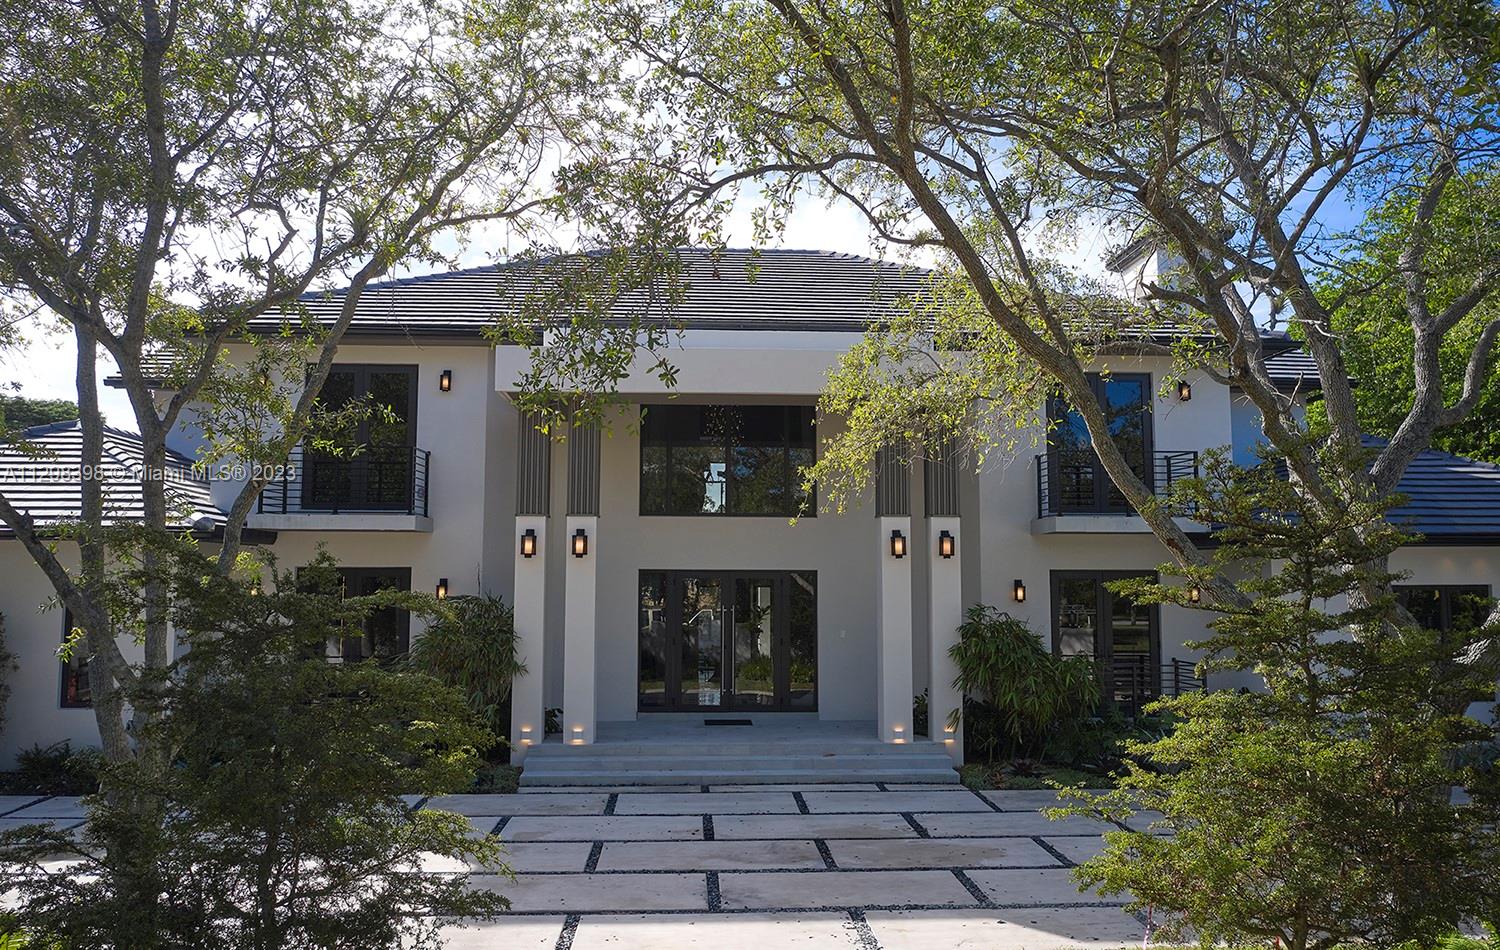 Fall in love with this new modern almost total of 9000 SF tropical residence that settles seamlessly in picturesque Pinecrest with a timeless, elegant, and comfortable spirit, muted in palette and filled with light. The glamorous estate is designed as an experience, unveiled in sequence: dramatic foyer, formal architectural dining room, modernist living areas, Fendi-inspired kitchen, home theater, private spaces, and separate service area with maid-quarters. The lush landscape is on full display from glass lined terrace and cabana with a summer kitchen around a resort-style pool. Living is an emotion, and how you want to feel is reflected in every aspect of this designer home. Pinecrest is filled with lush greenery, renowned bike trails, top schools, and large estate homes.